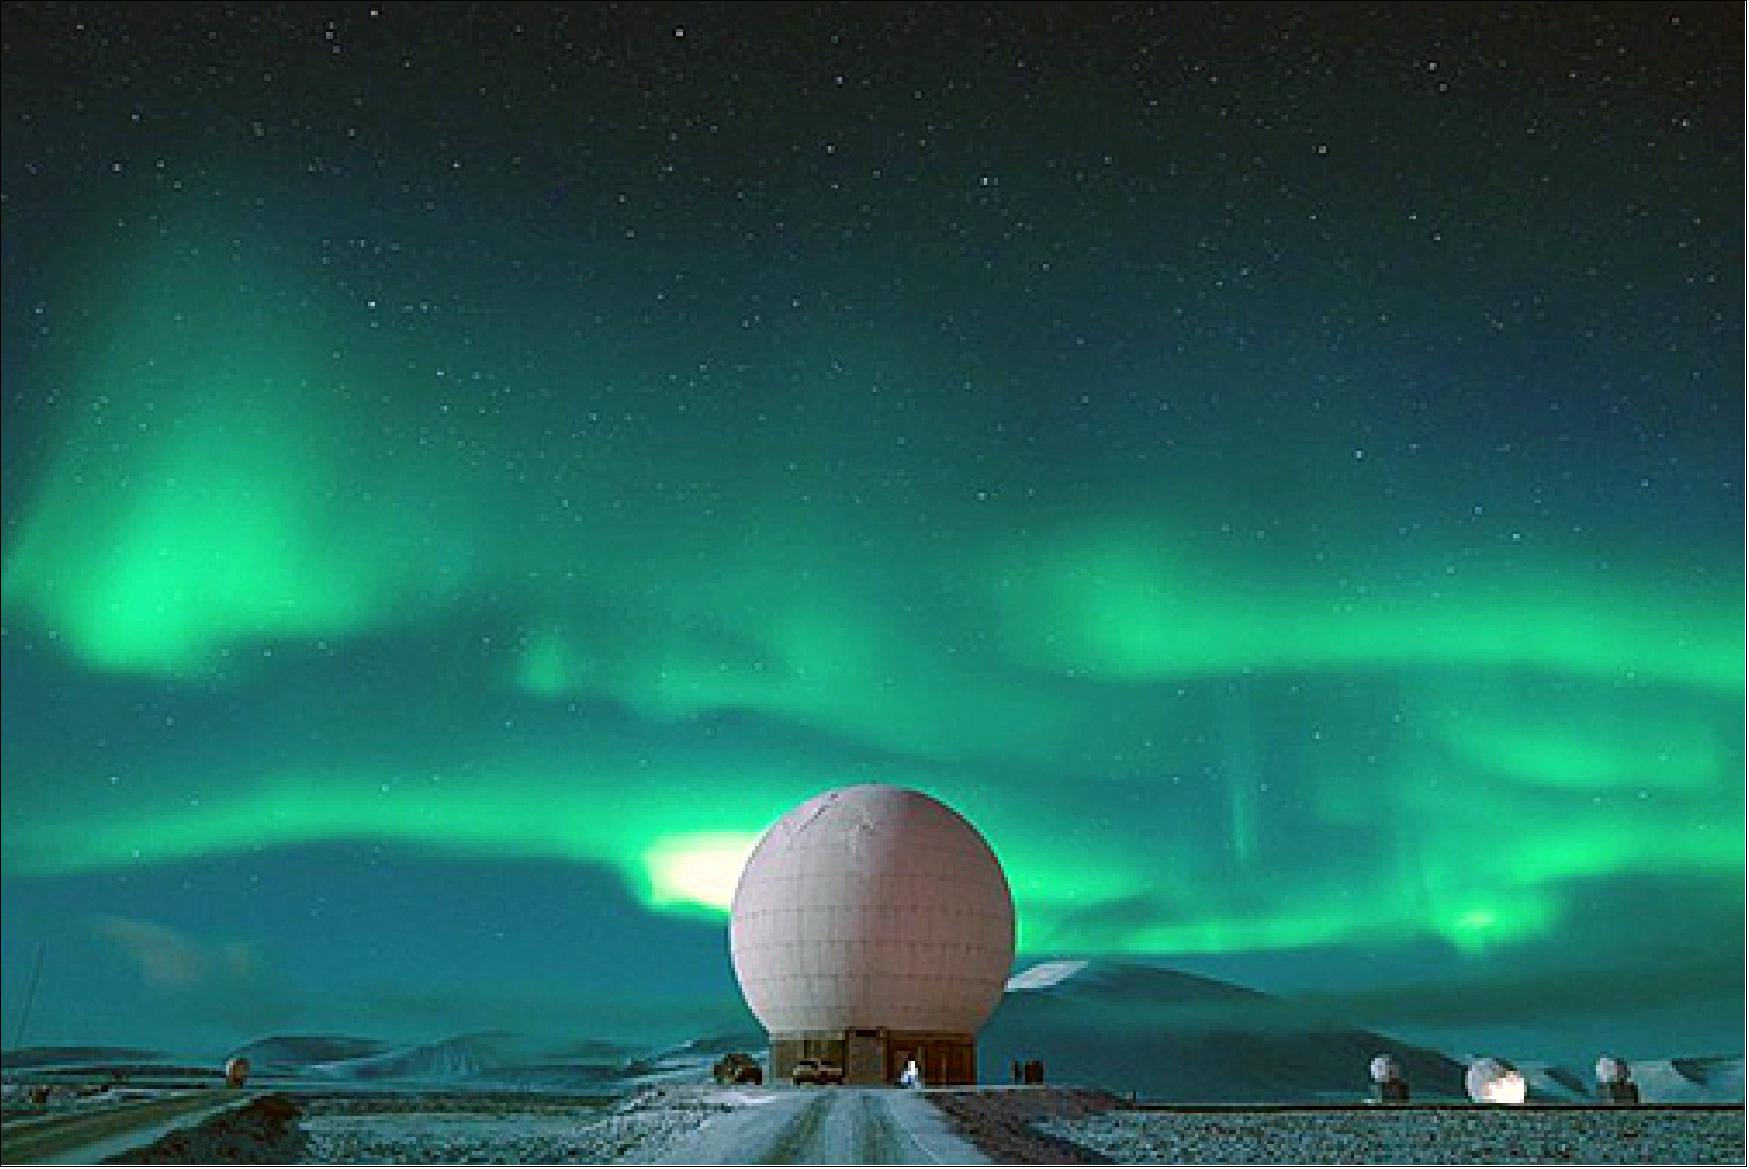 Figure 12: Svalbard, Norway, is the location of the northernmost Joint Polar Satellite System CGS (Common Ground System) station (image credit: Raytheon)